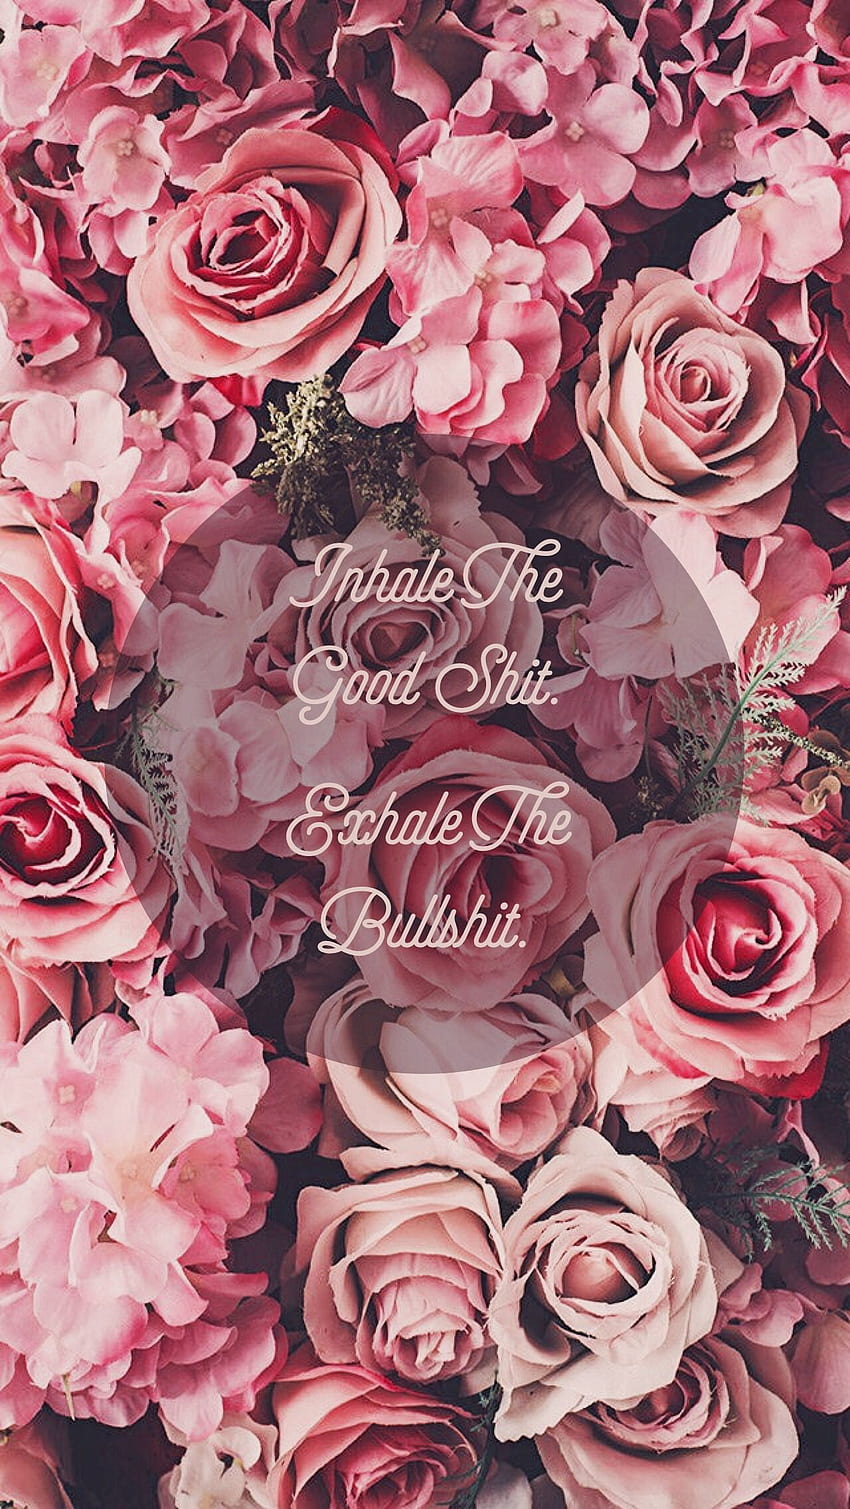 IPhone 6 Inhale the good shit. Exhale the bullshit, Indie Floral HD phone wallpaper